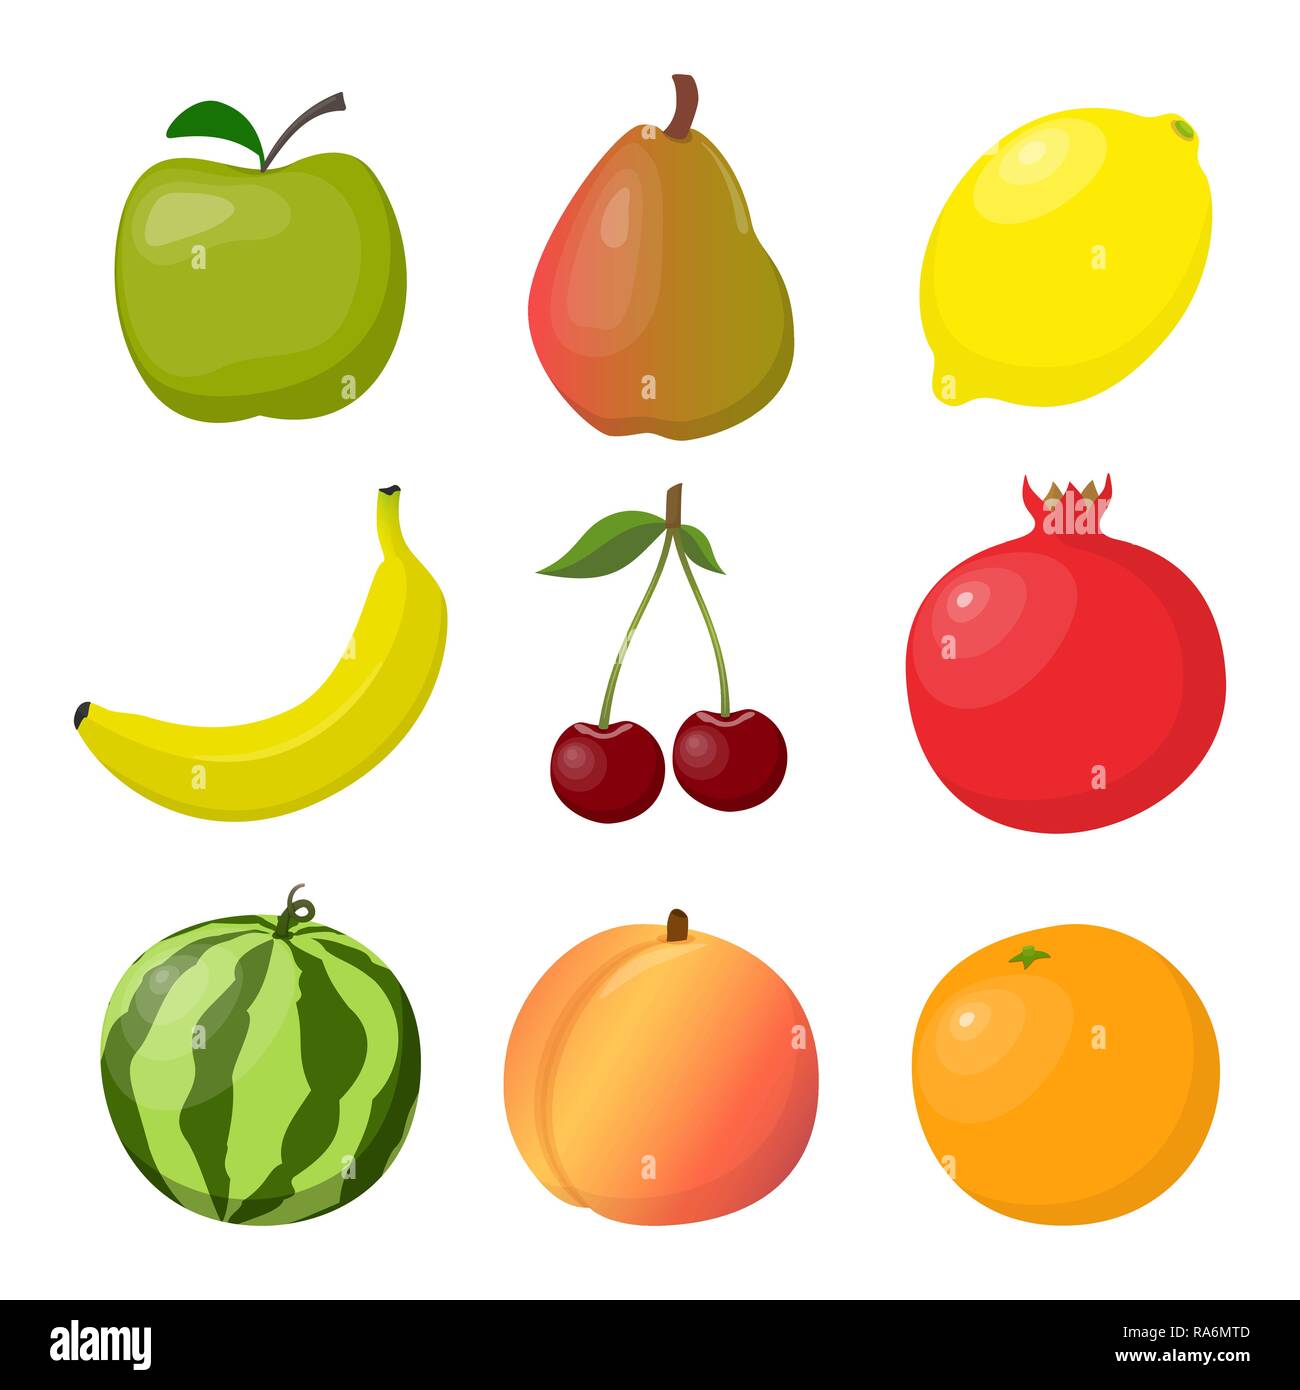 Juicy ripe fruits and berries, bright and colorful, set. Apple, pear, orange, banana, peach cherry watermelon lemon pomegranate Vector illustration Stock Vector